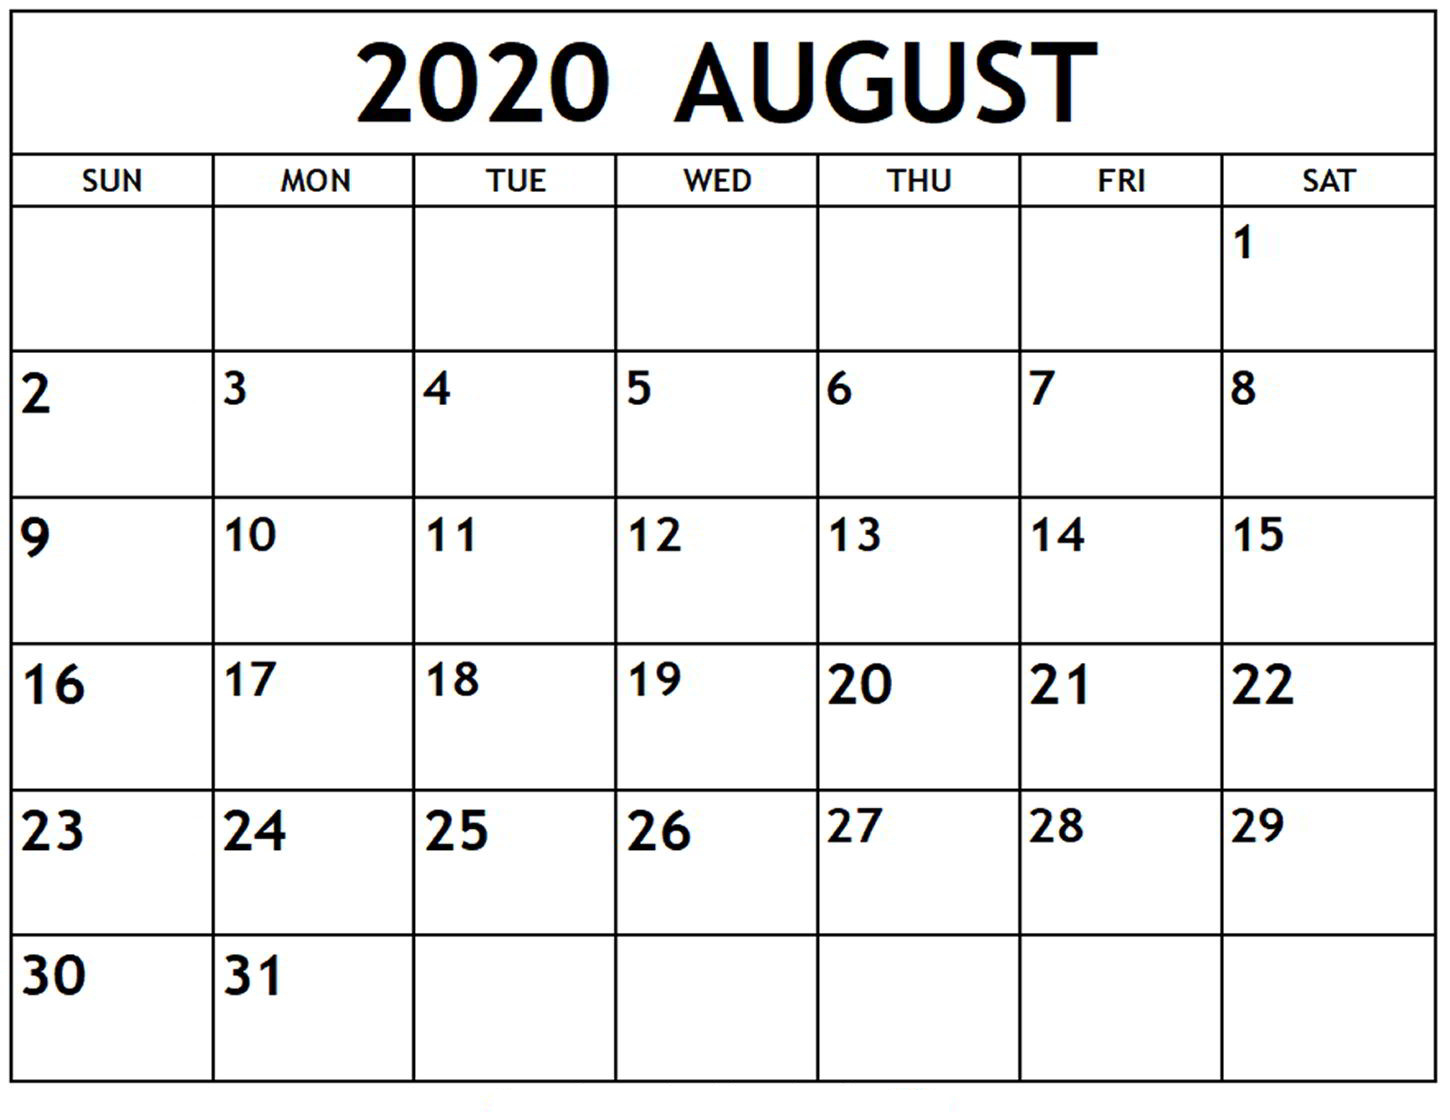 August 2020 Calendar Printable Monthly Templates